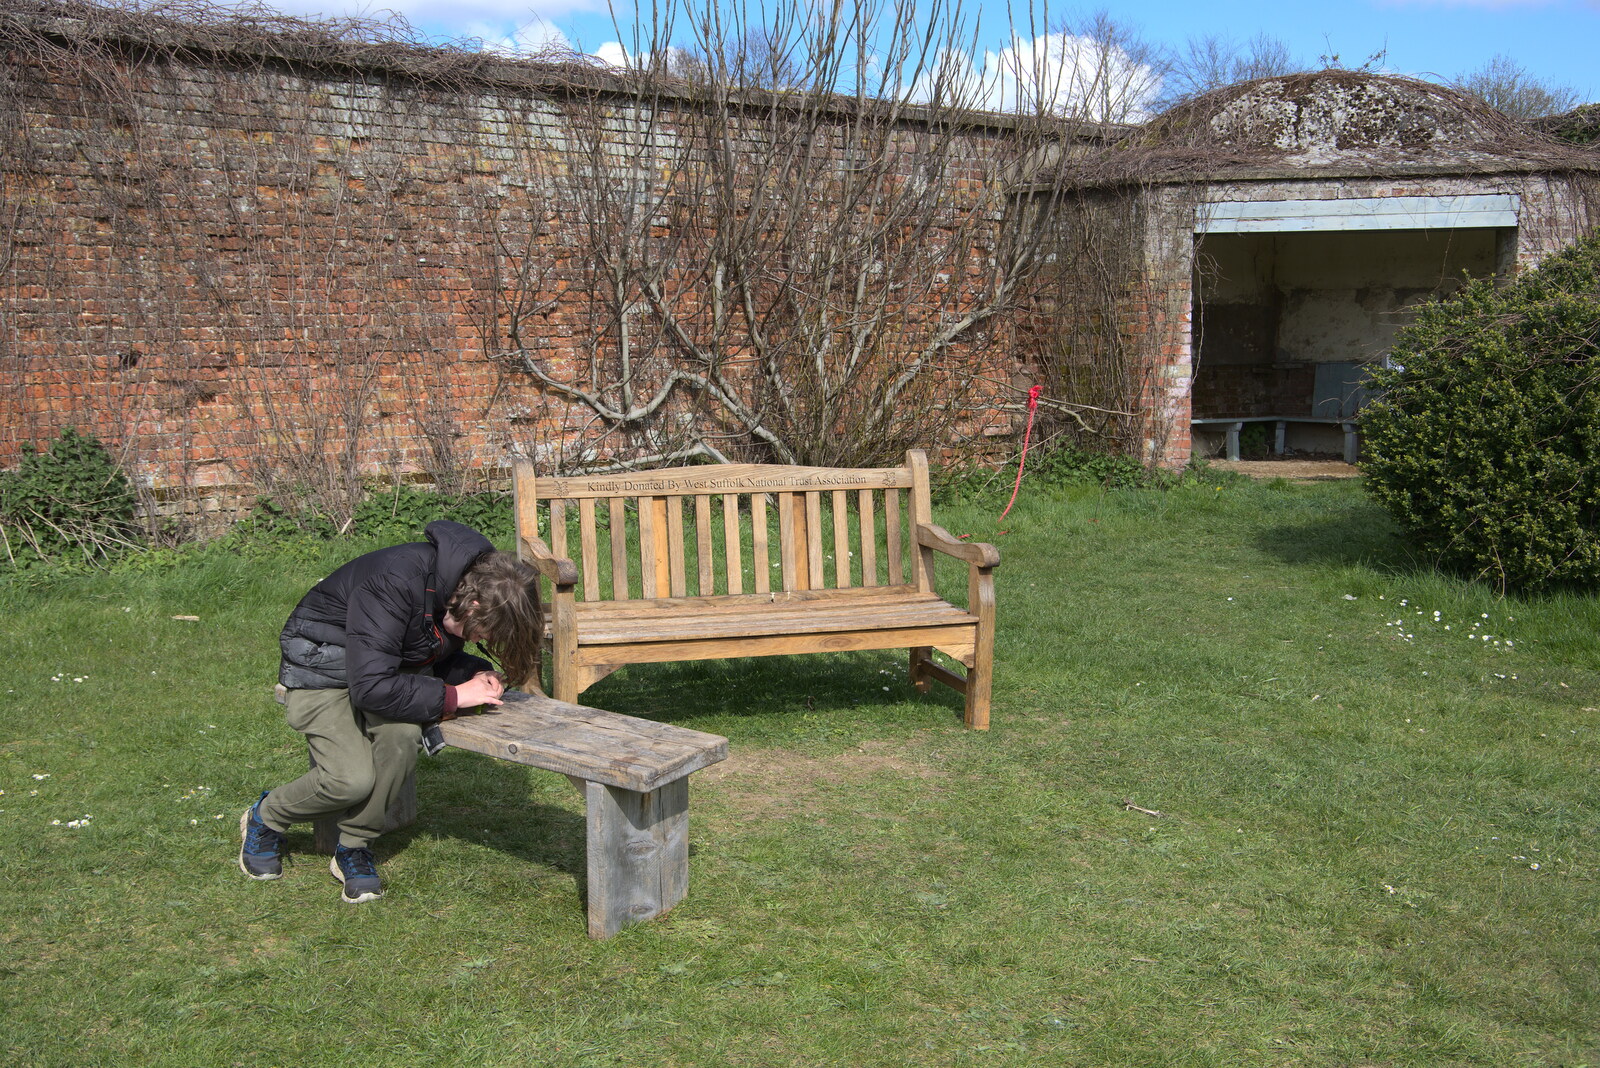 Fred makes something from A Return to Ickworth House, Horringer, Suffolk - 11th April 2021